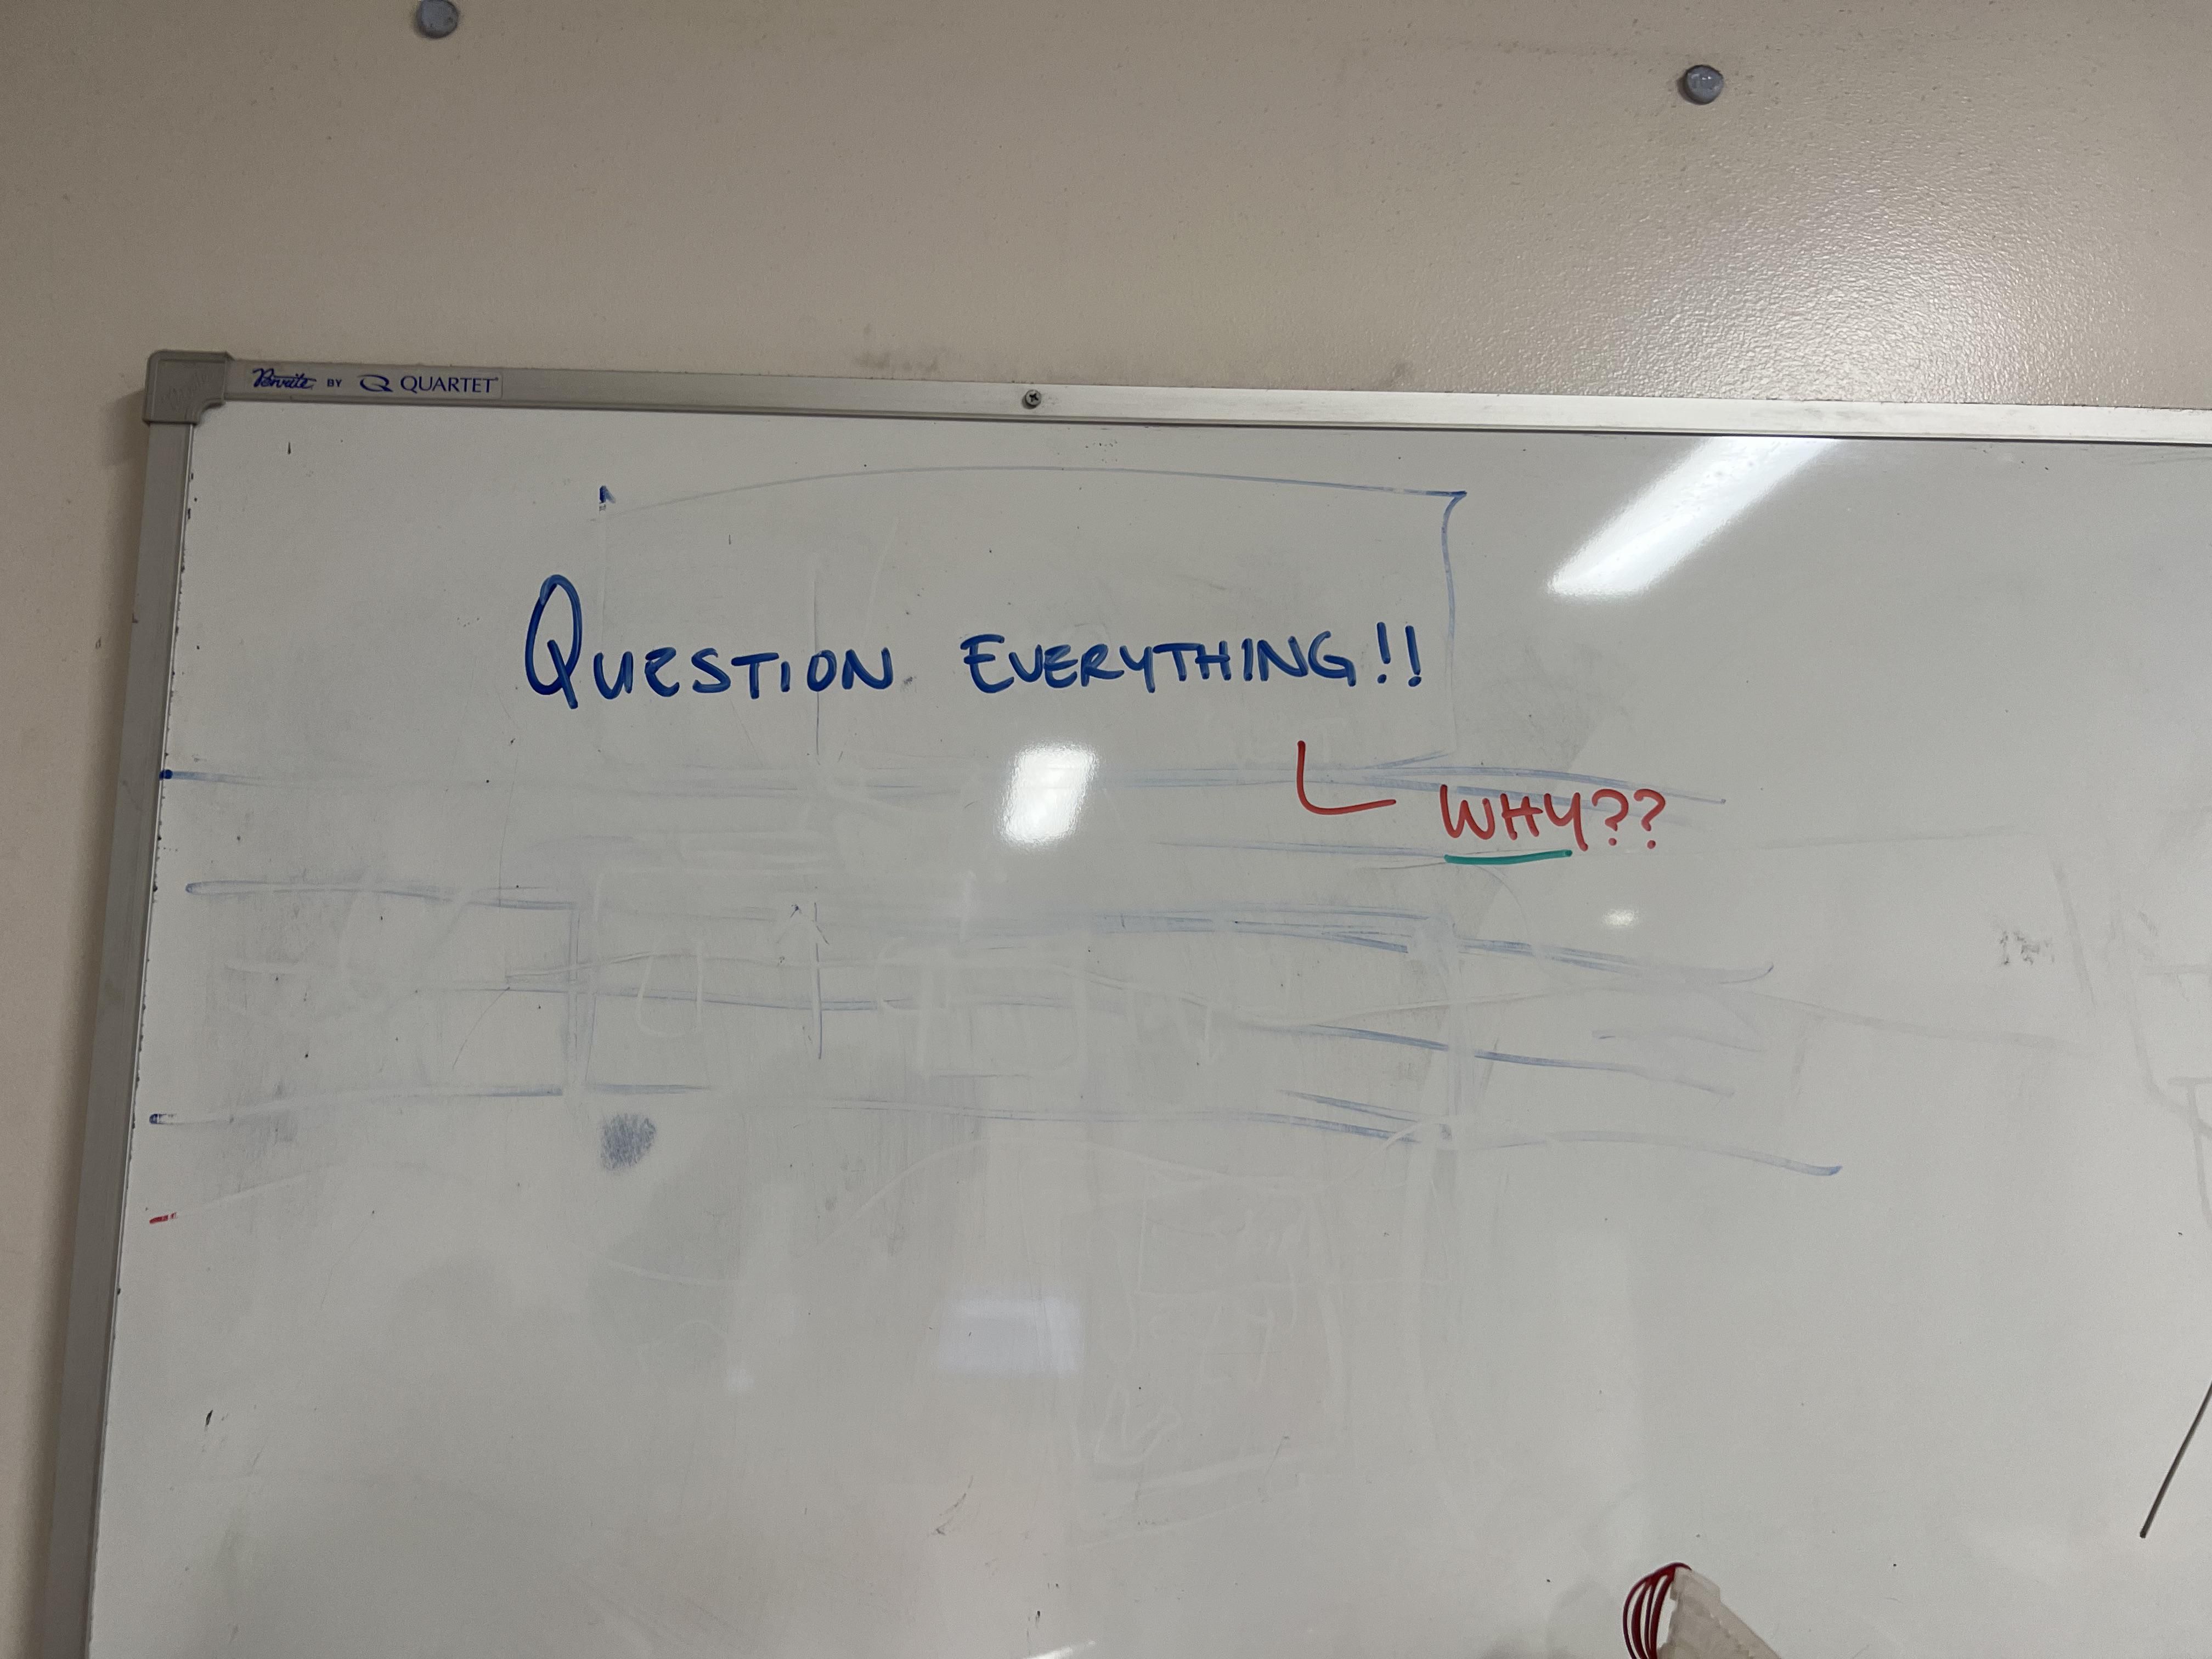 On the maintenance planner’s whiteboard at work.